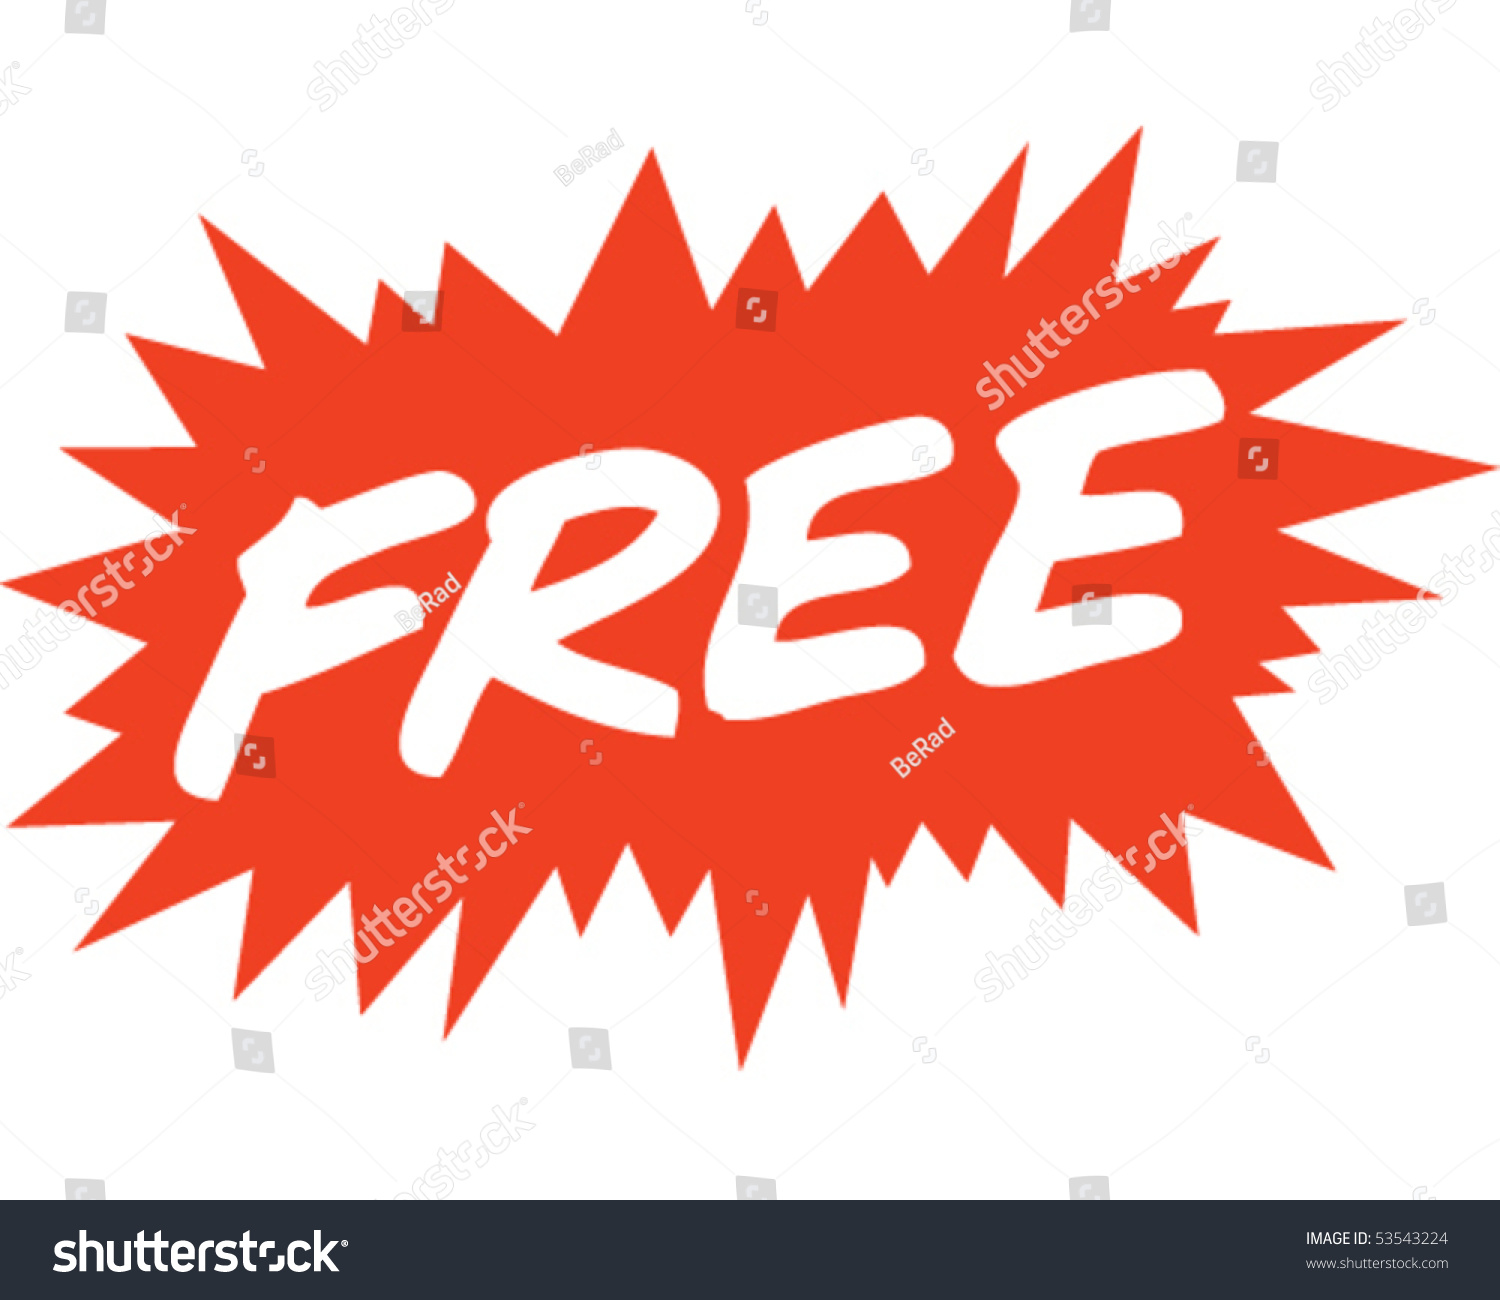 Download Free Sign Stock Vector Royalty Free 53543224